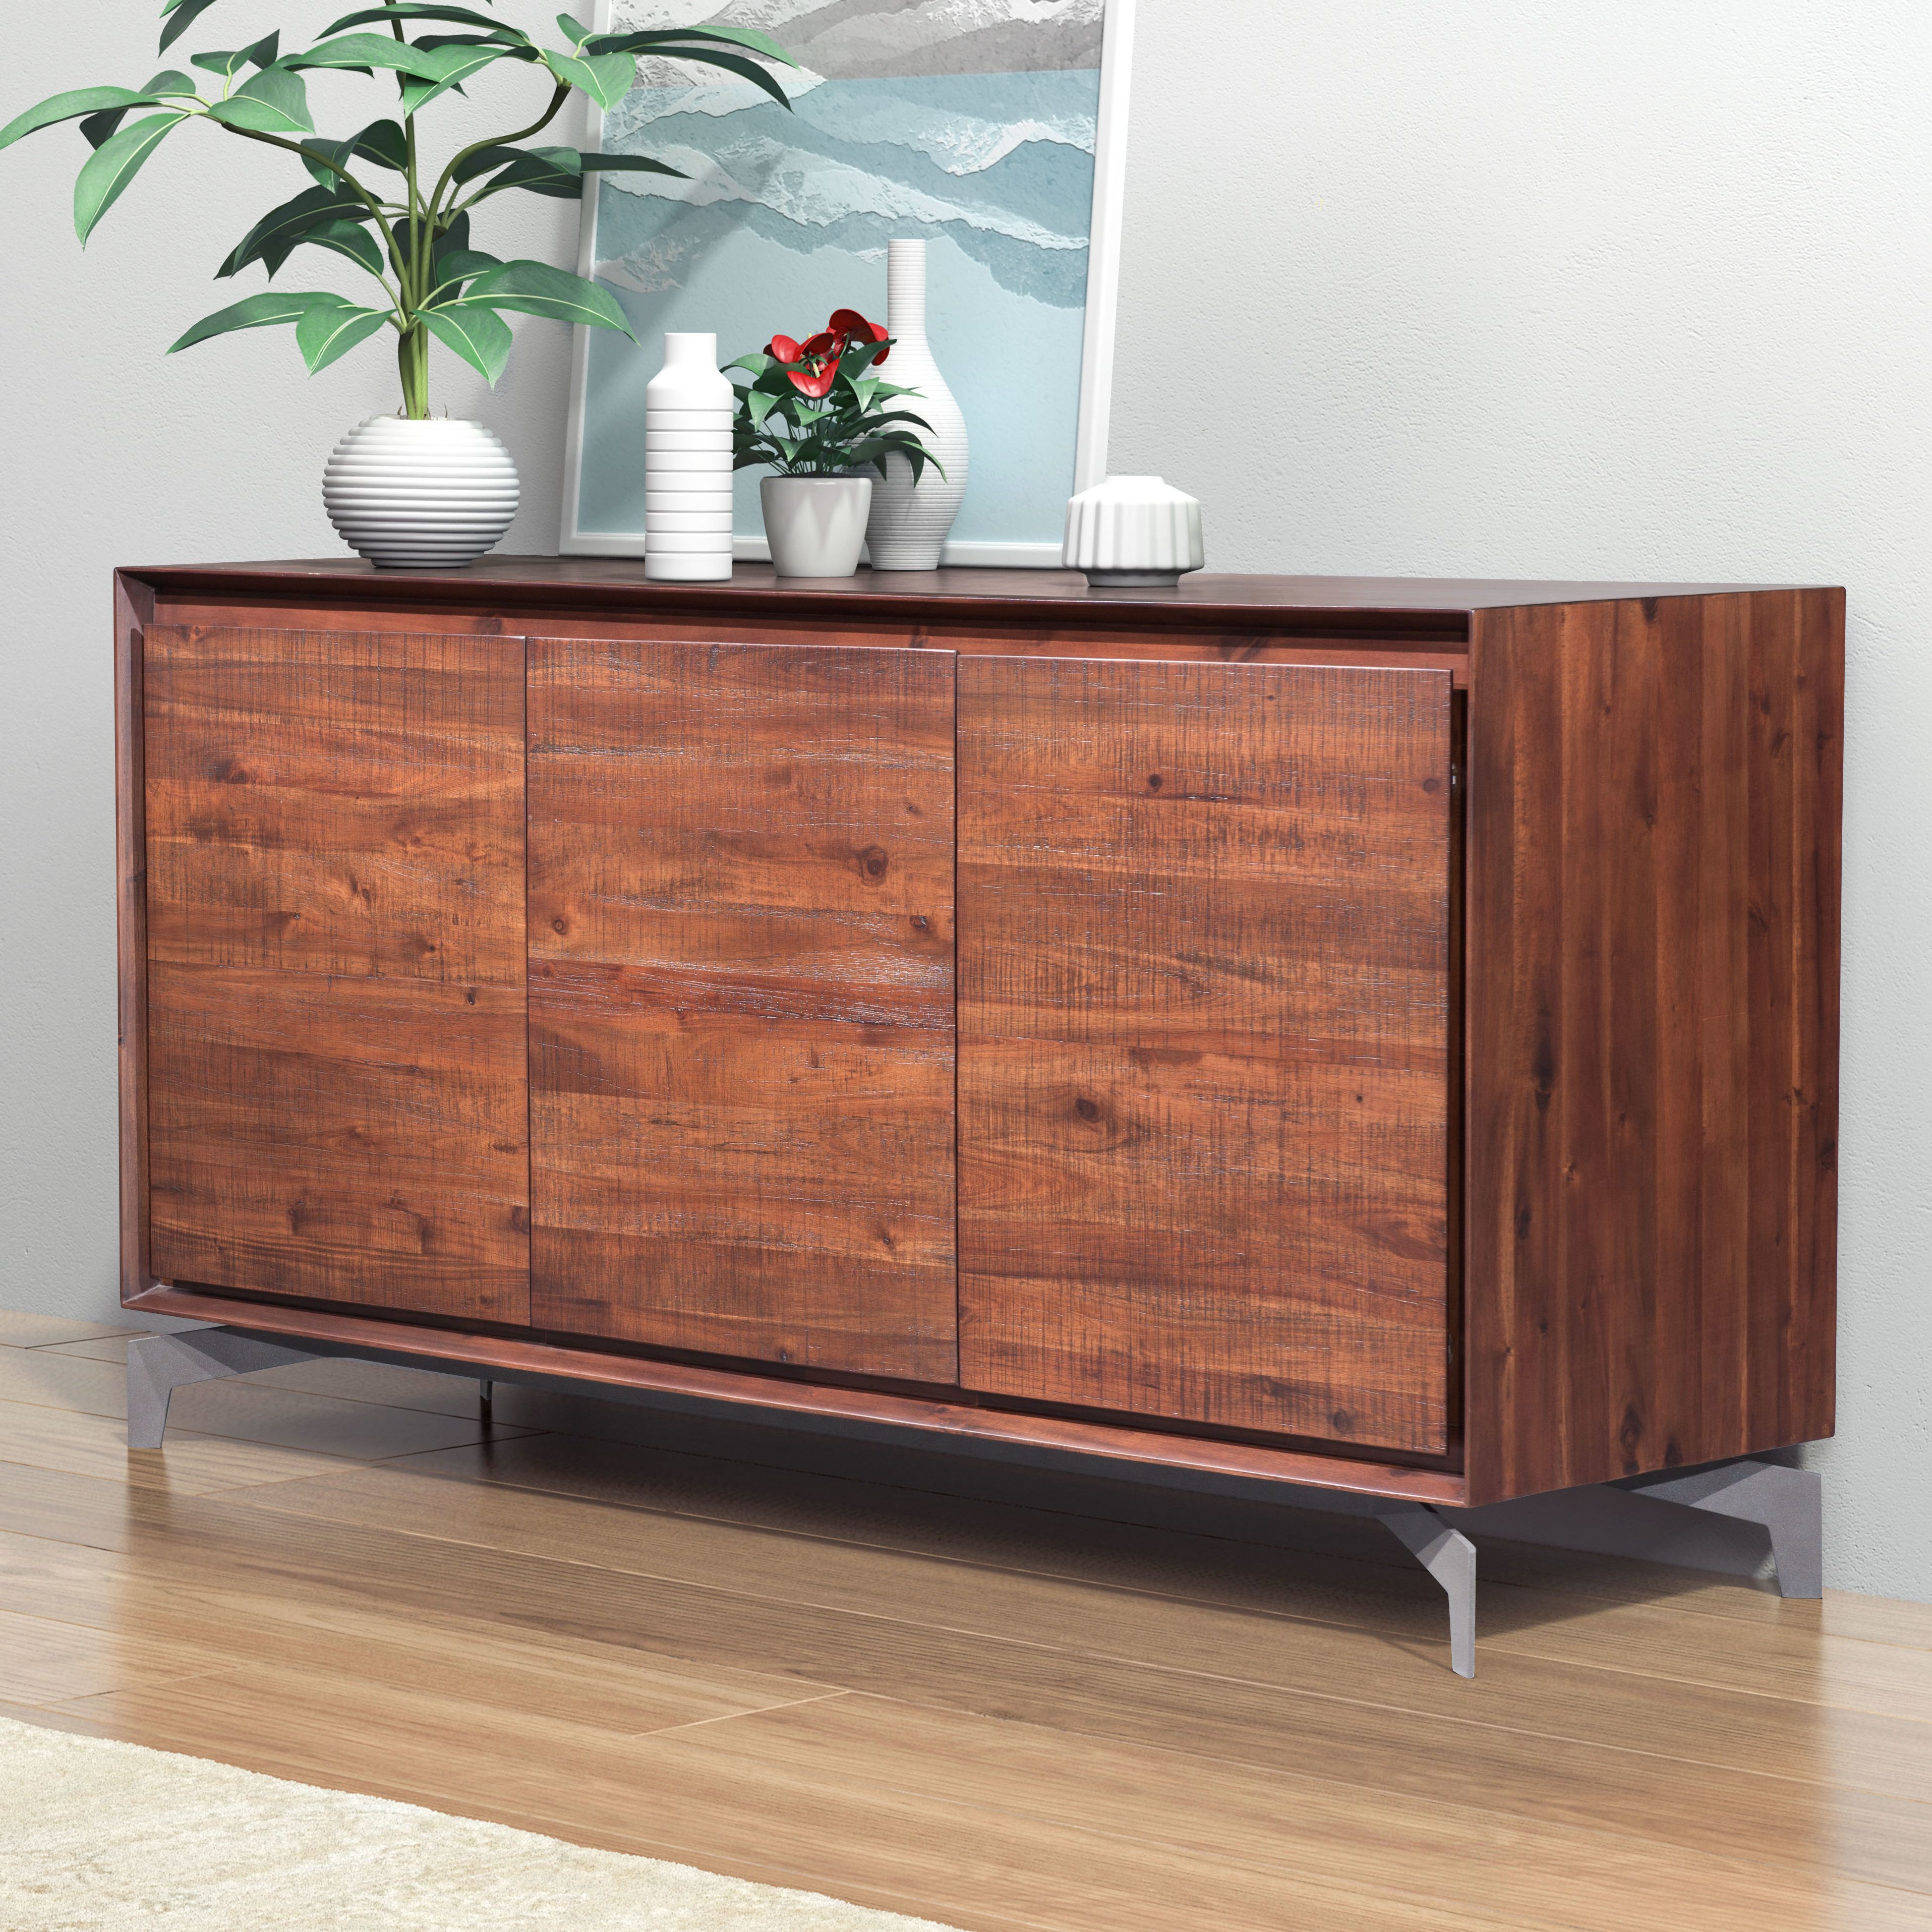 Riggleman Sideboard | Joss & Main With Regard To Armelle Sideboards (Gallery 9 of 20)